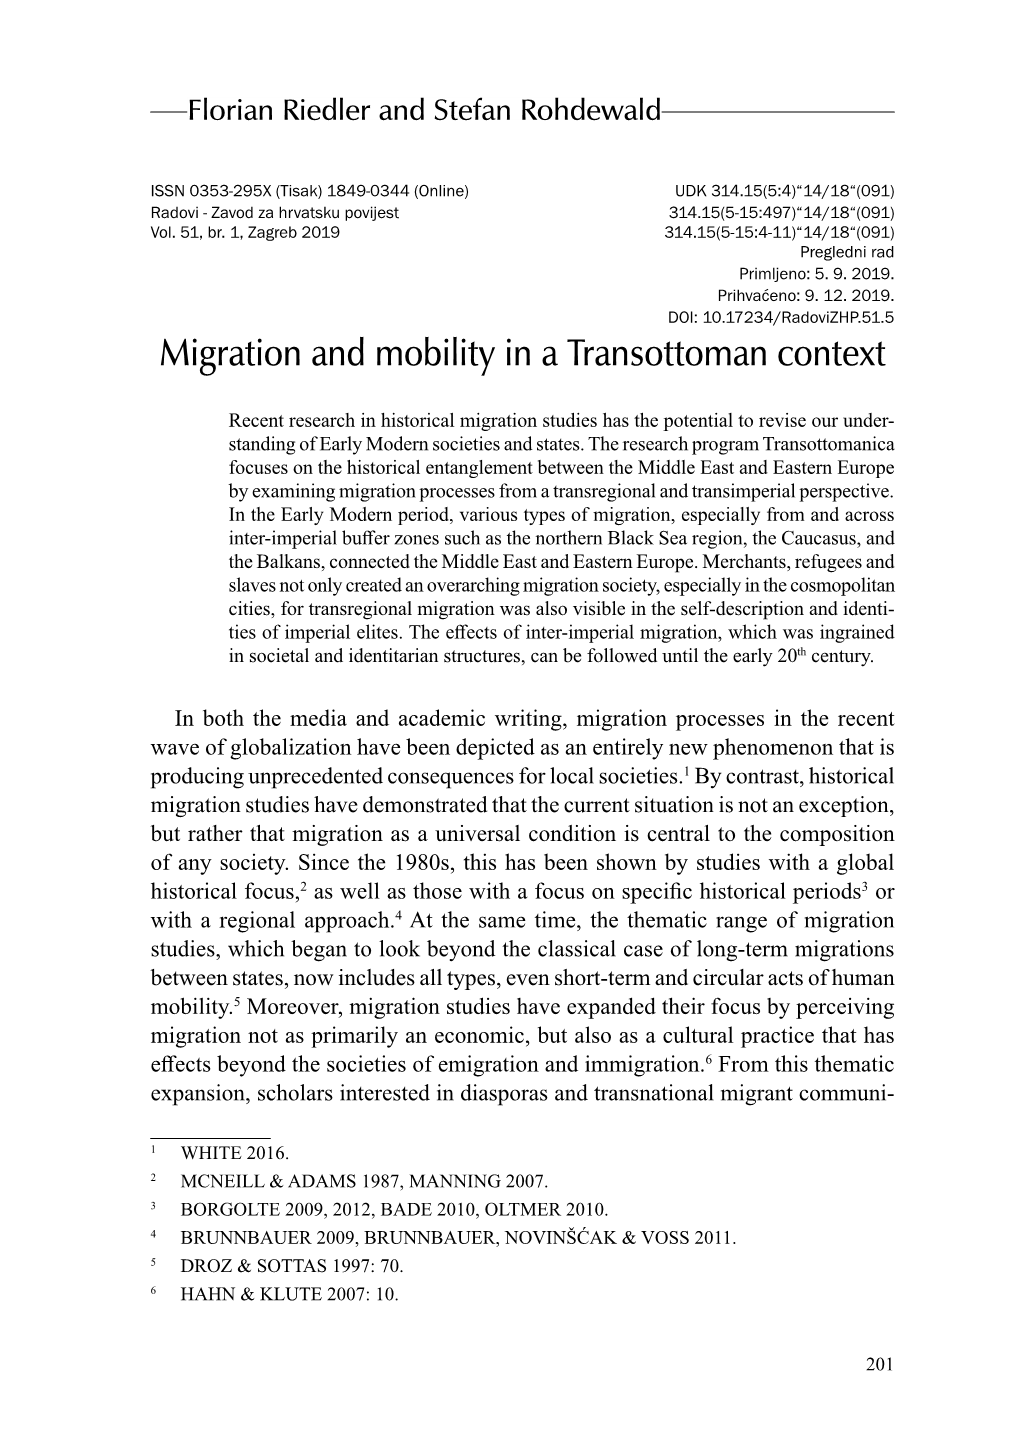 Migration and Mobility in a Transottoman Context